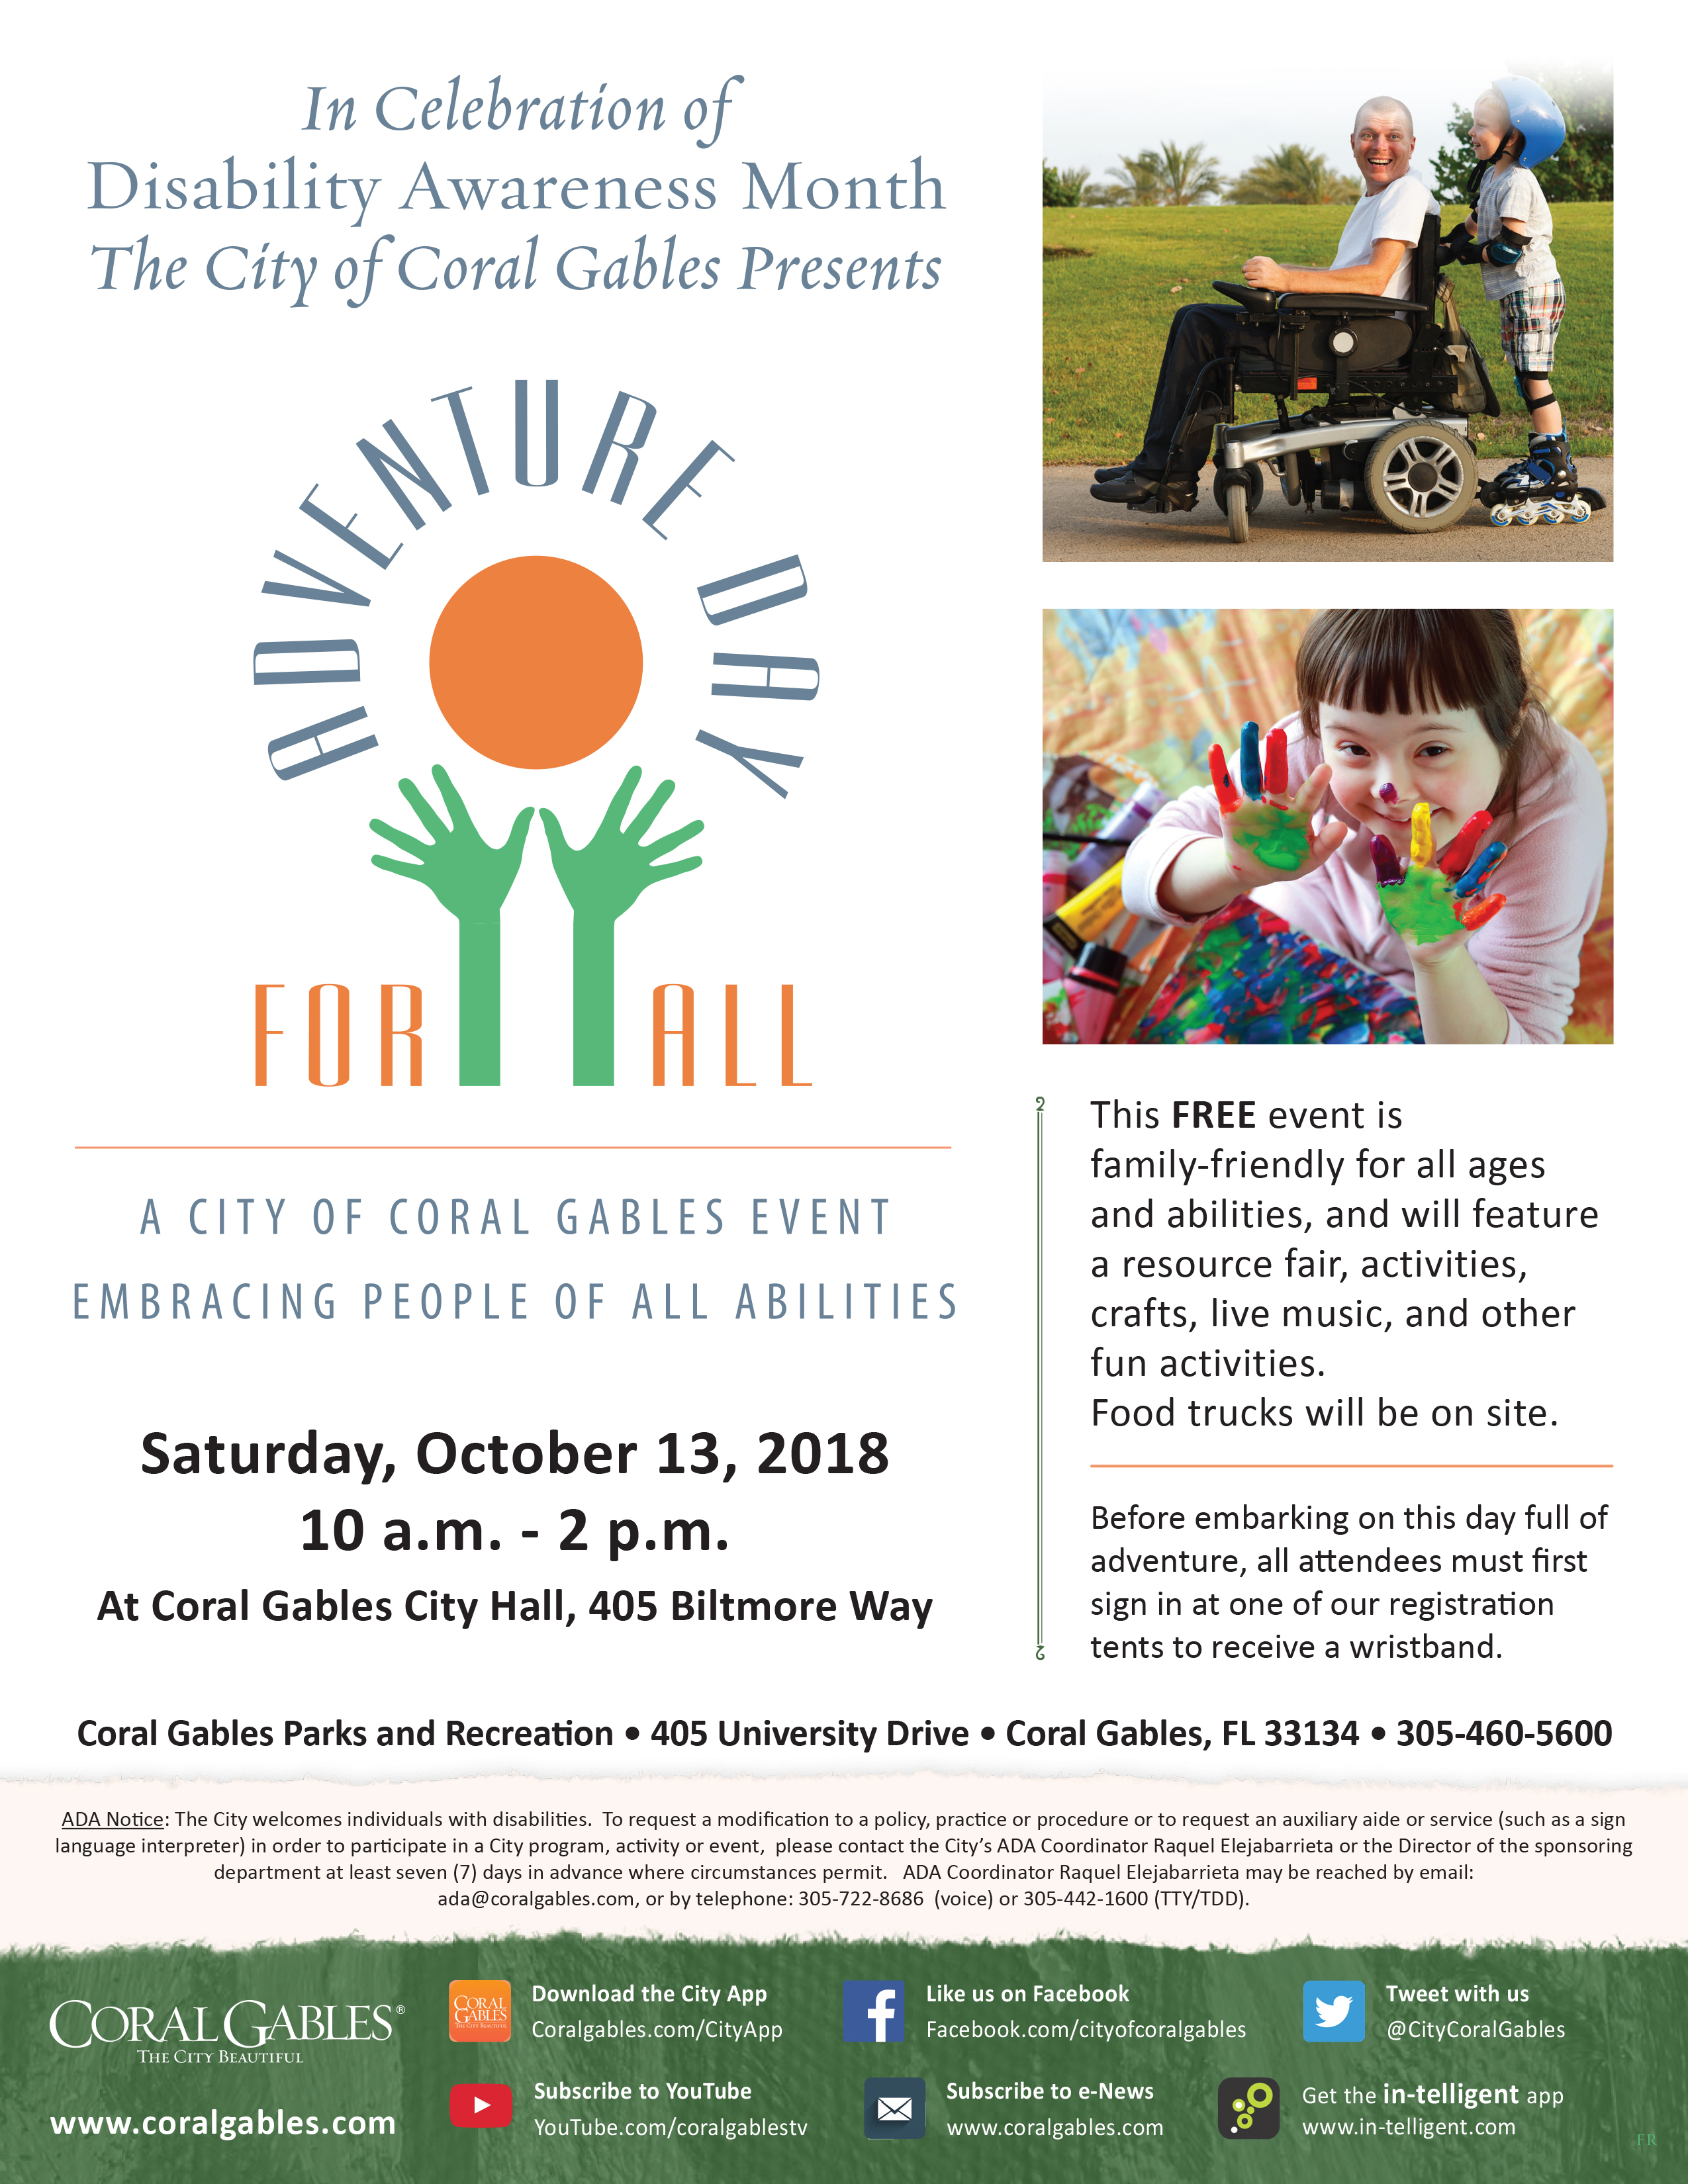 Event Flyer - In Celebration of Disability Awareness Month The City of Coral Gables Presents Adventure Day for All - Free, family friendly, event for people of all ages and abilities to celebrate Disability Awareness Month with live entertainment, local resource for people with disabilities, and a variety of fully accessible games and activities for everyone to try. There will be accessible bathrooms, quiet spaces, and interpreters available during the event. Food trucks will be on site with items for purchase. ADA Notice: The City welcomes individuals with disabilities. To request a modification to a policy, practice or procedure or to request an auxiliary aide or service (such as a sign language interpreter) in order to participate in a City program, activity or event, please contact the City’s ADA Coordinator Raquel Elejabarrieta or the Director of the sponsoring department at least seven (7) days in advance where circumstances permit. ADA Coordinator Raquel Elejabarrieta may be reached by email: ada@coralgables.com, or by telephone: 305-722-8686 (voice) or 305-442-1600 (TTY/TDD).